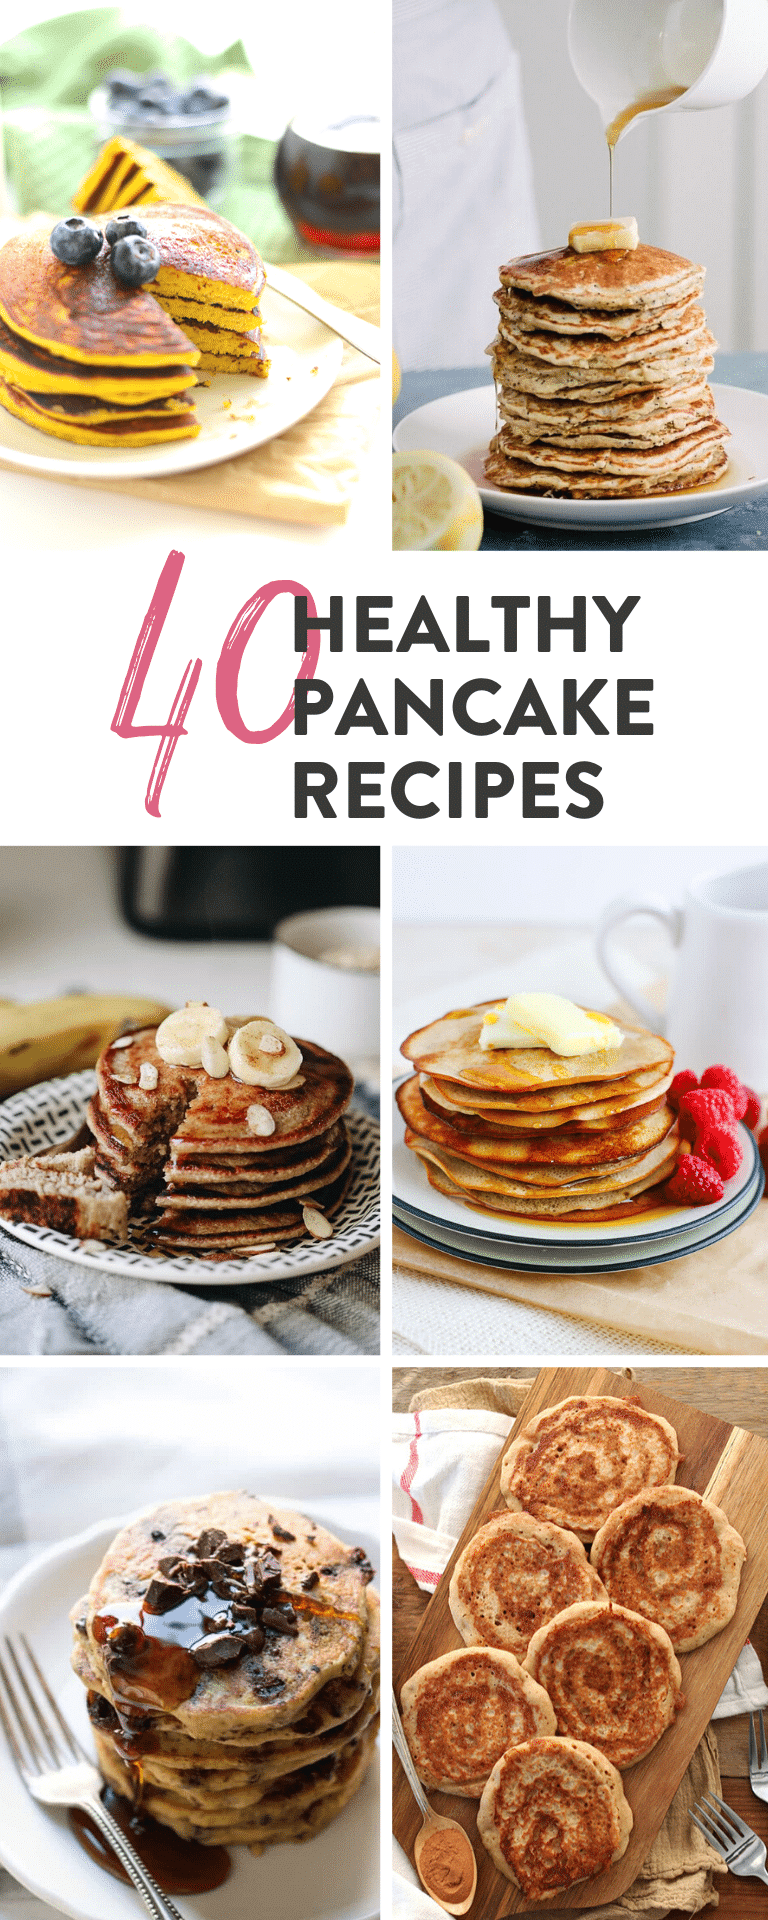 The Ultimate Healthy Pancake Recipe Round-Up - The Healthy Maven